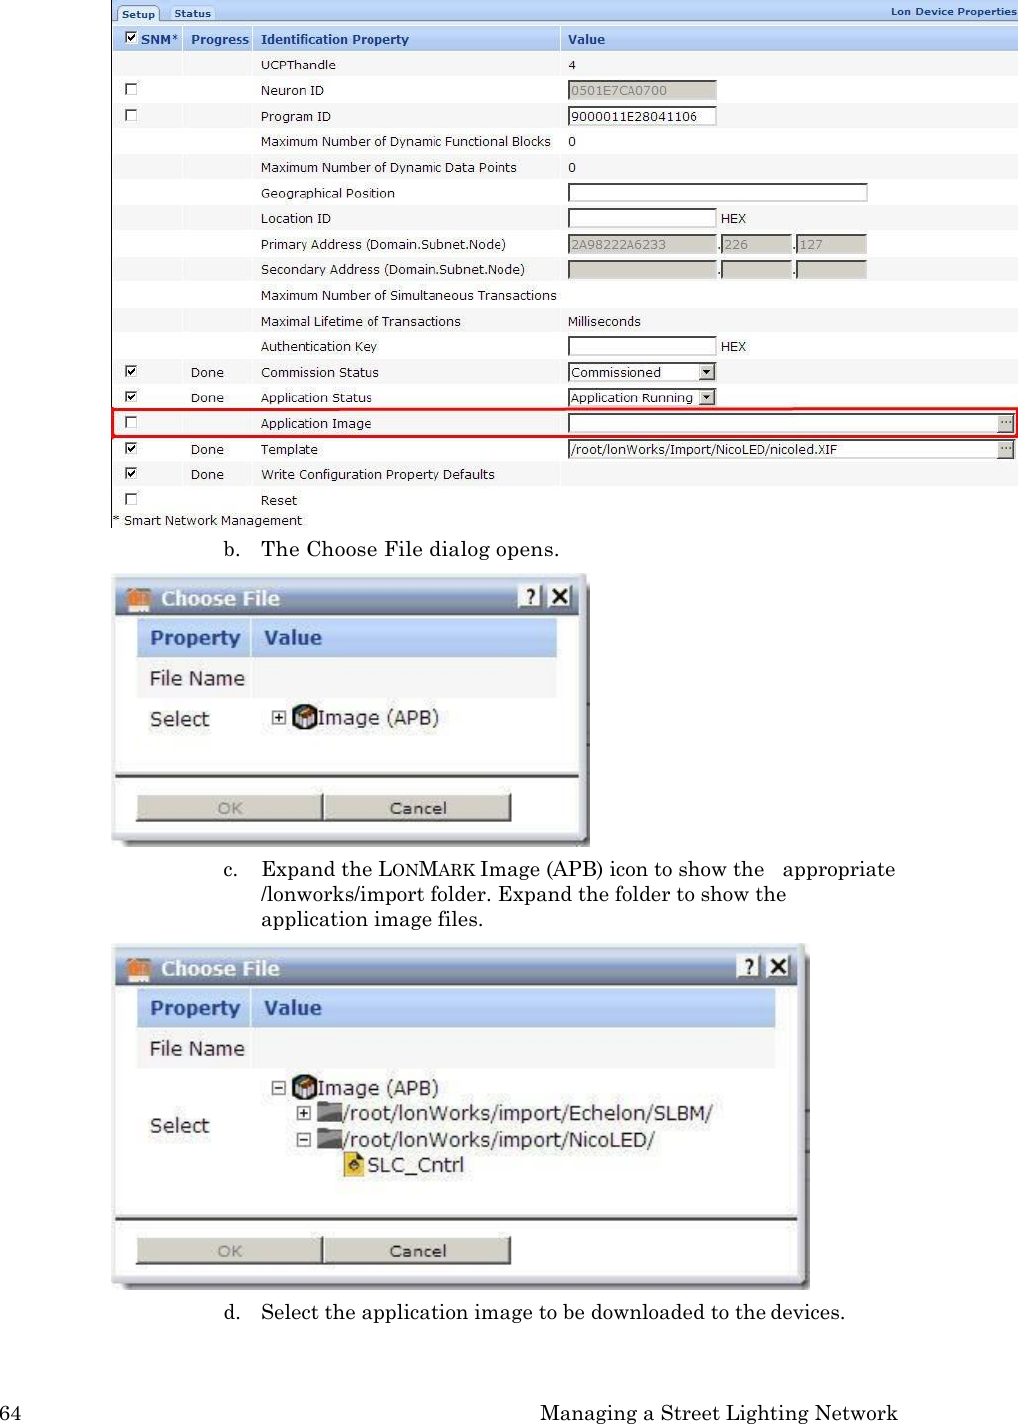 64 Managing a Street Lighting Network   b. The Choose File dialog opens. c. Expand the LONMARK Image (APB) icon to show the   appropriate /lonworks/import folder. Expand the folder to show the application image files. d. Select the application image to be downloaded to the devices. 